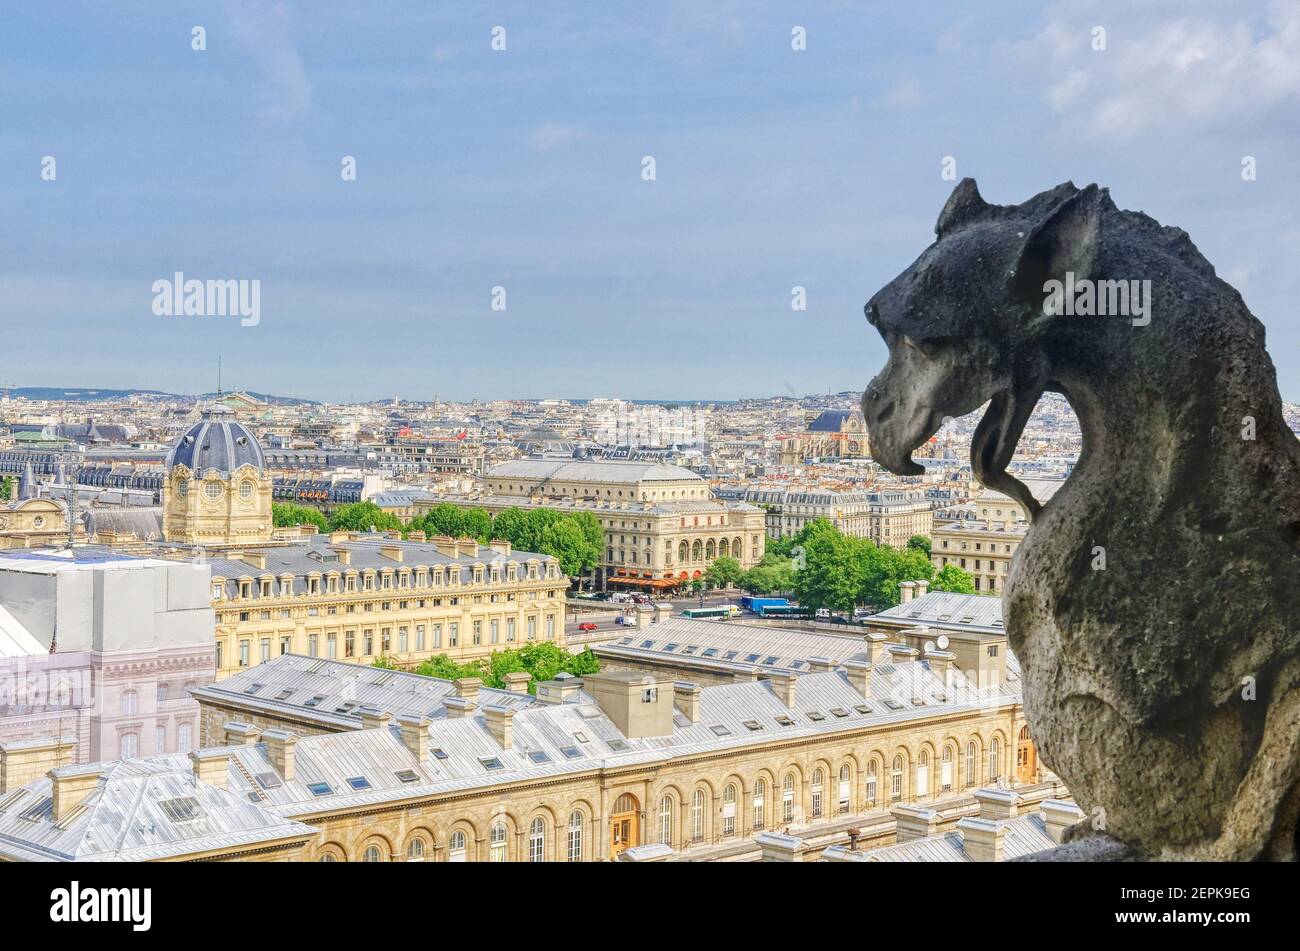 The view across Paris from the tower of Notre Dame de Paris with the gargoyles Stock Photo